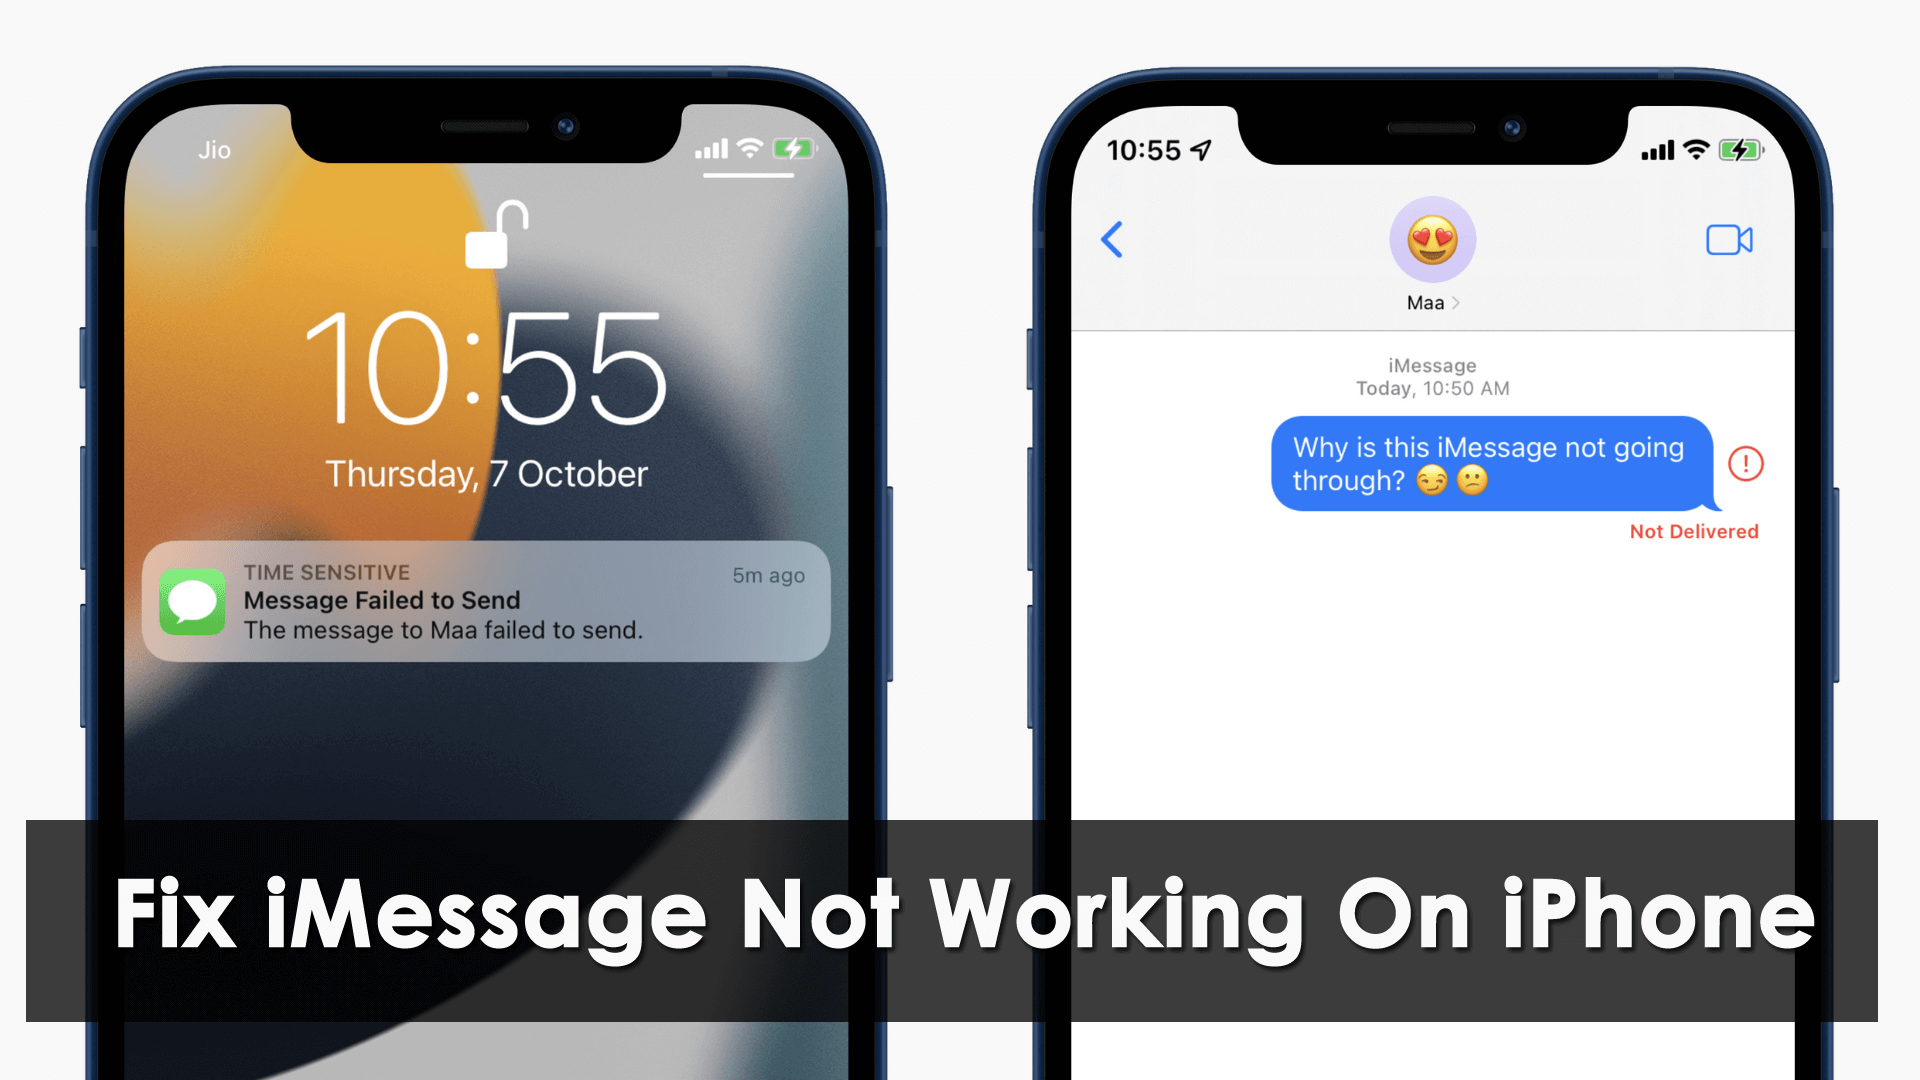 Fix iMessage Not Working On iPhone